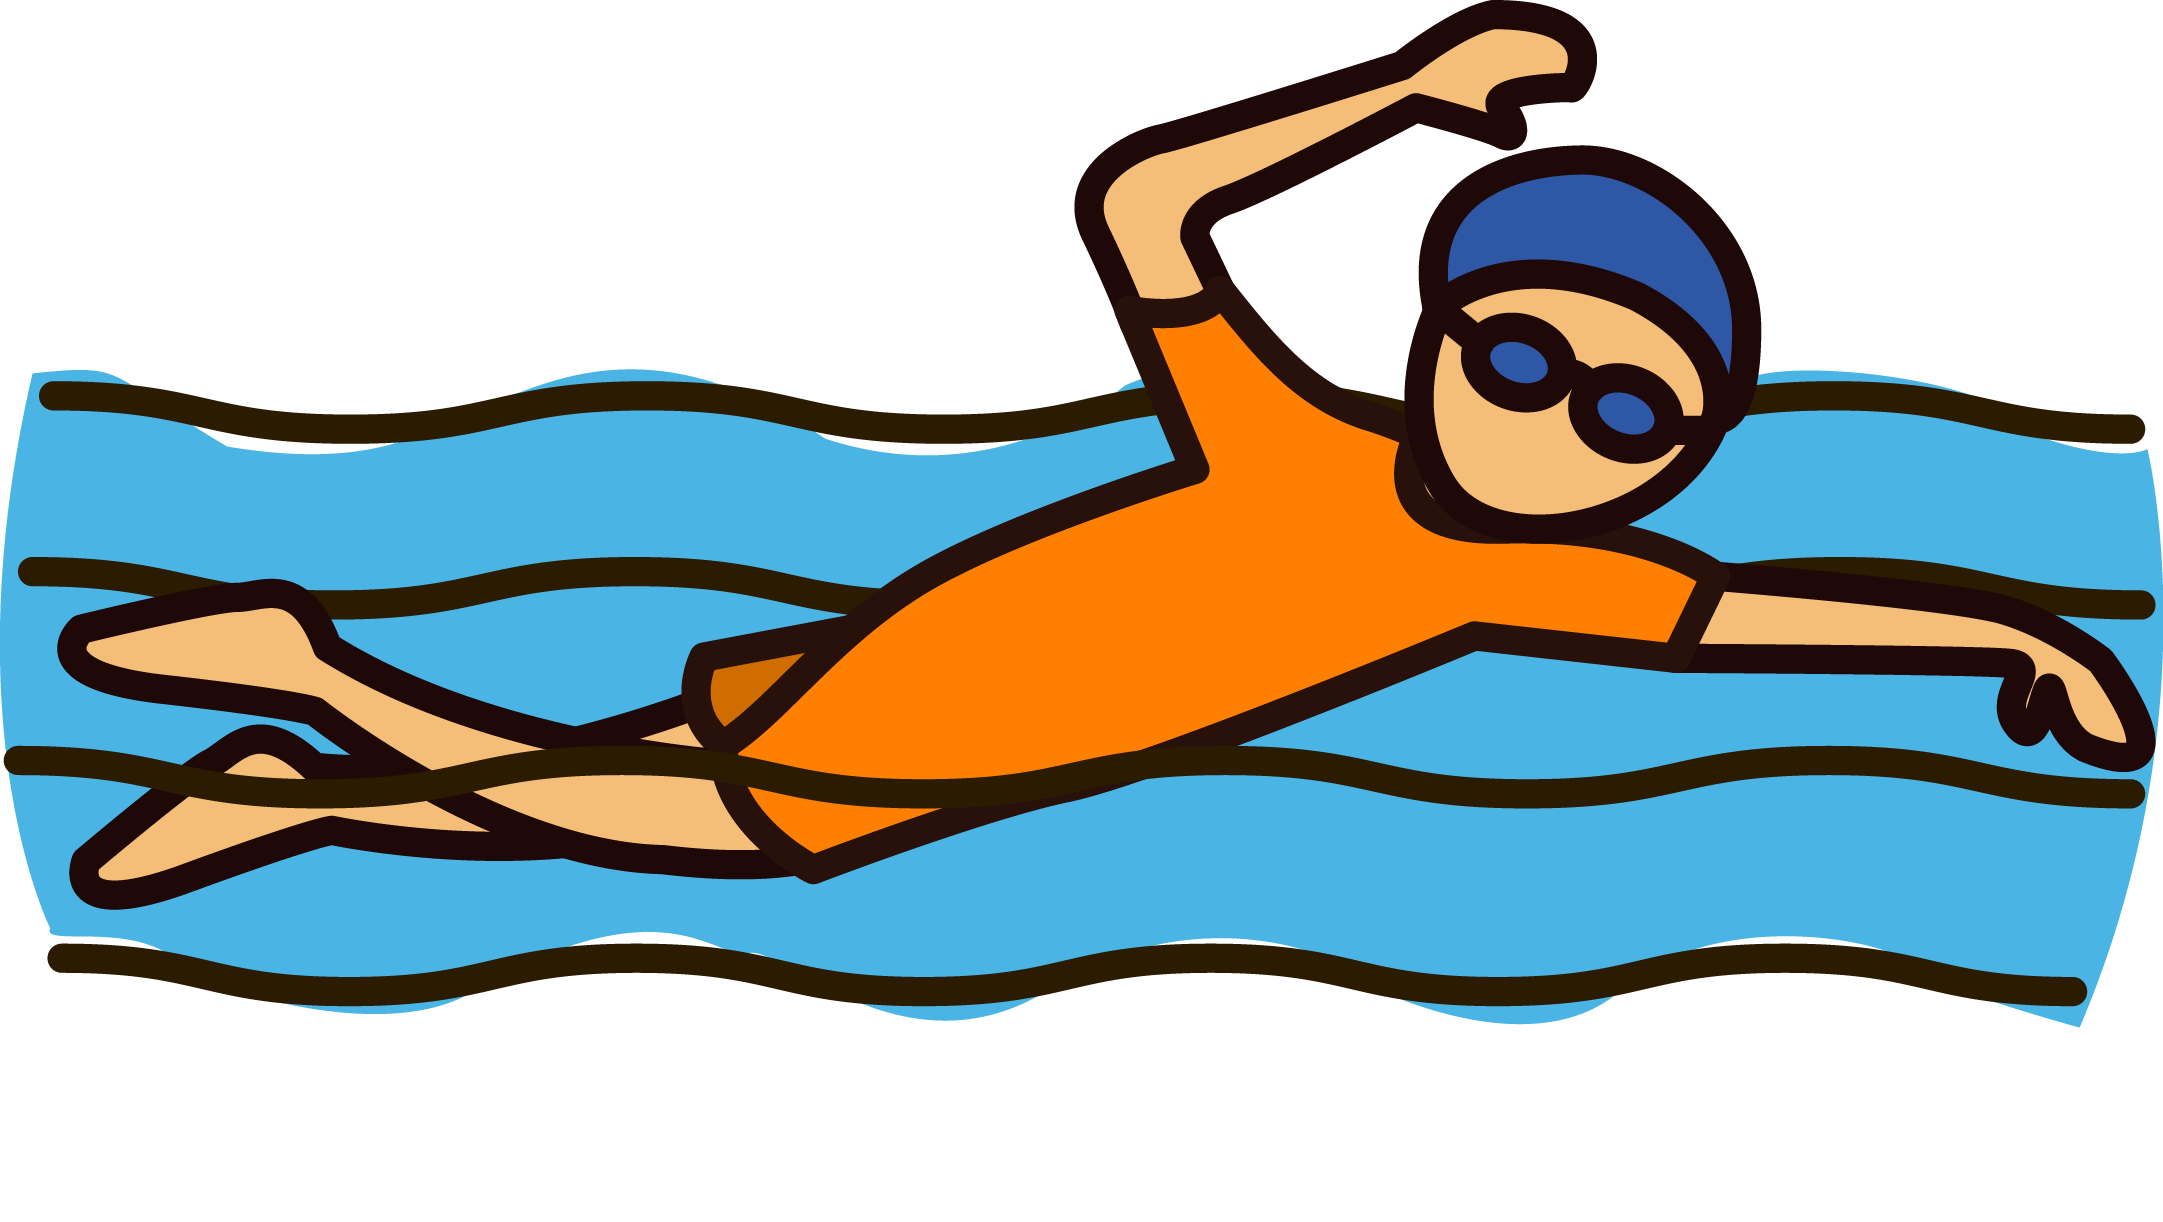 Tool clipart swimming. Trinetra about free indian